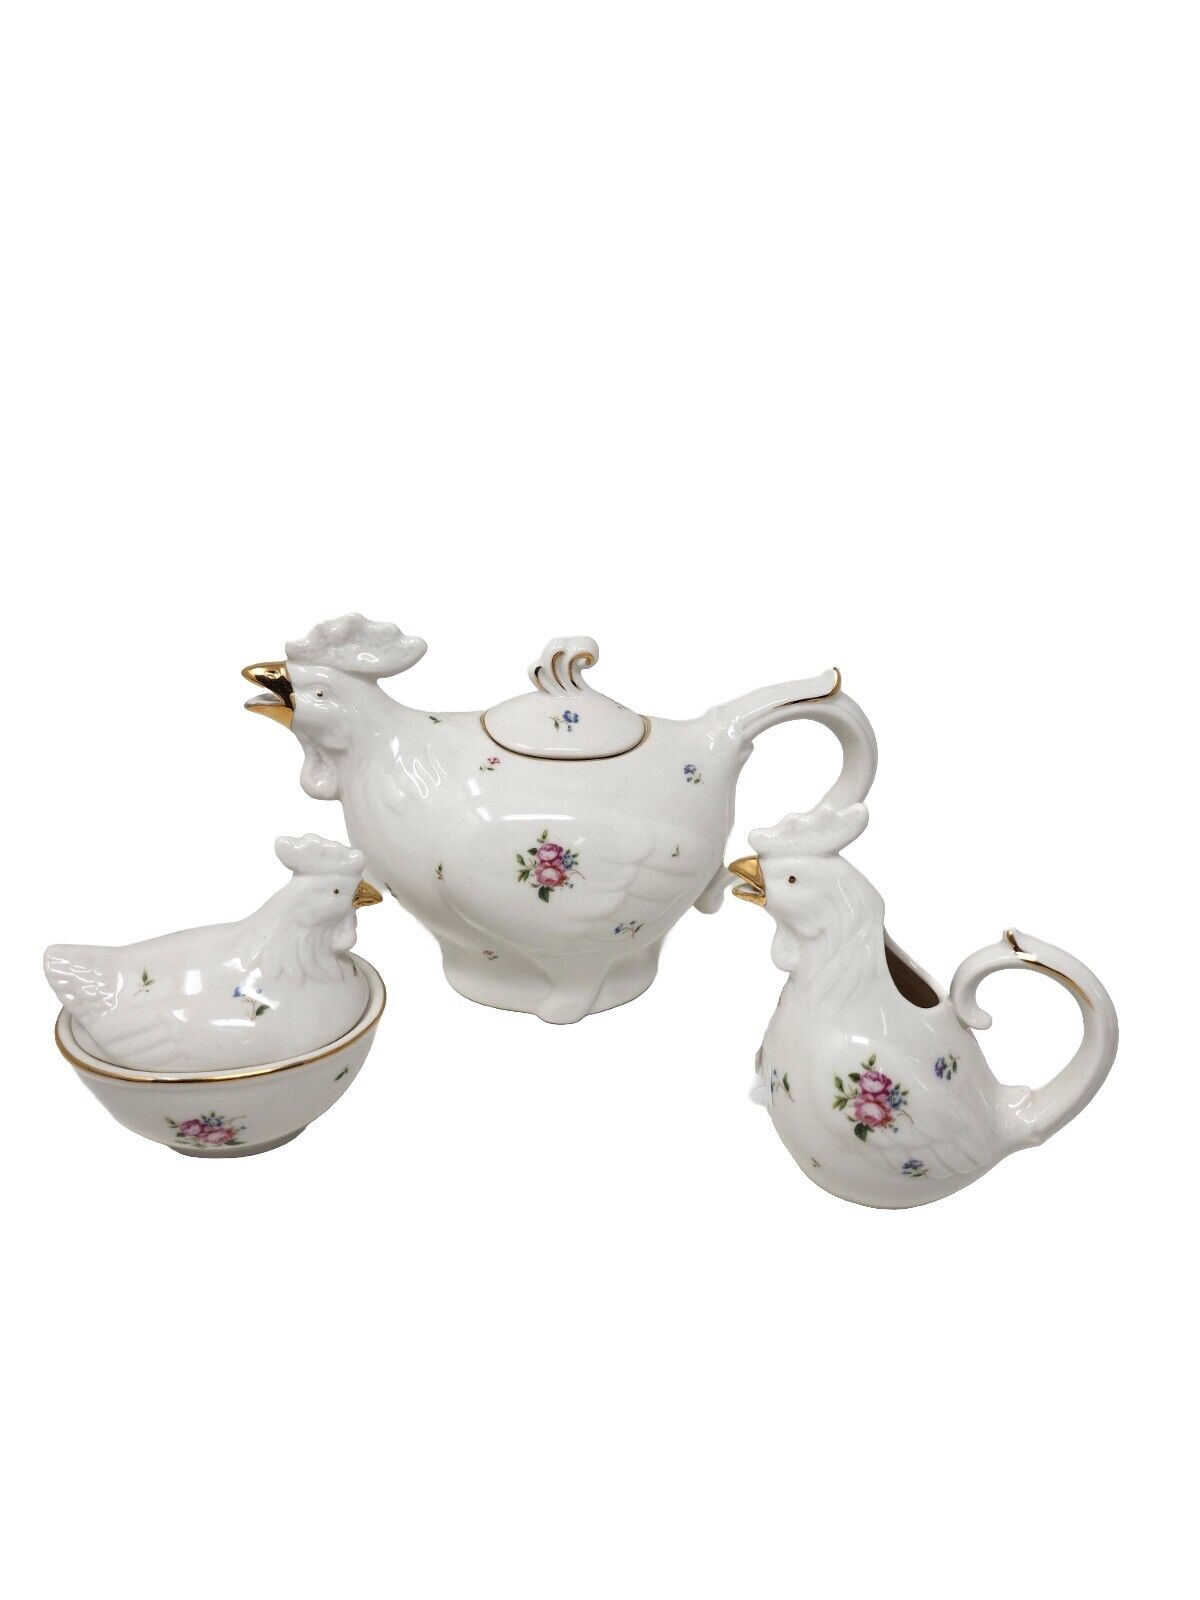 Graces Teaware  Rooster Floral Teapot Creamer and Sugar Bowl New